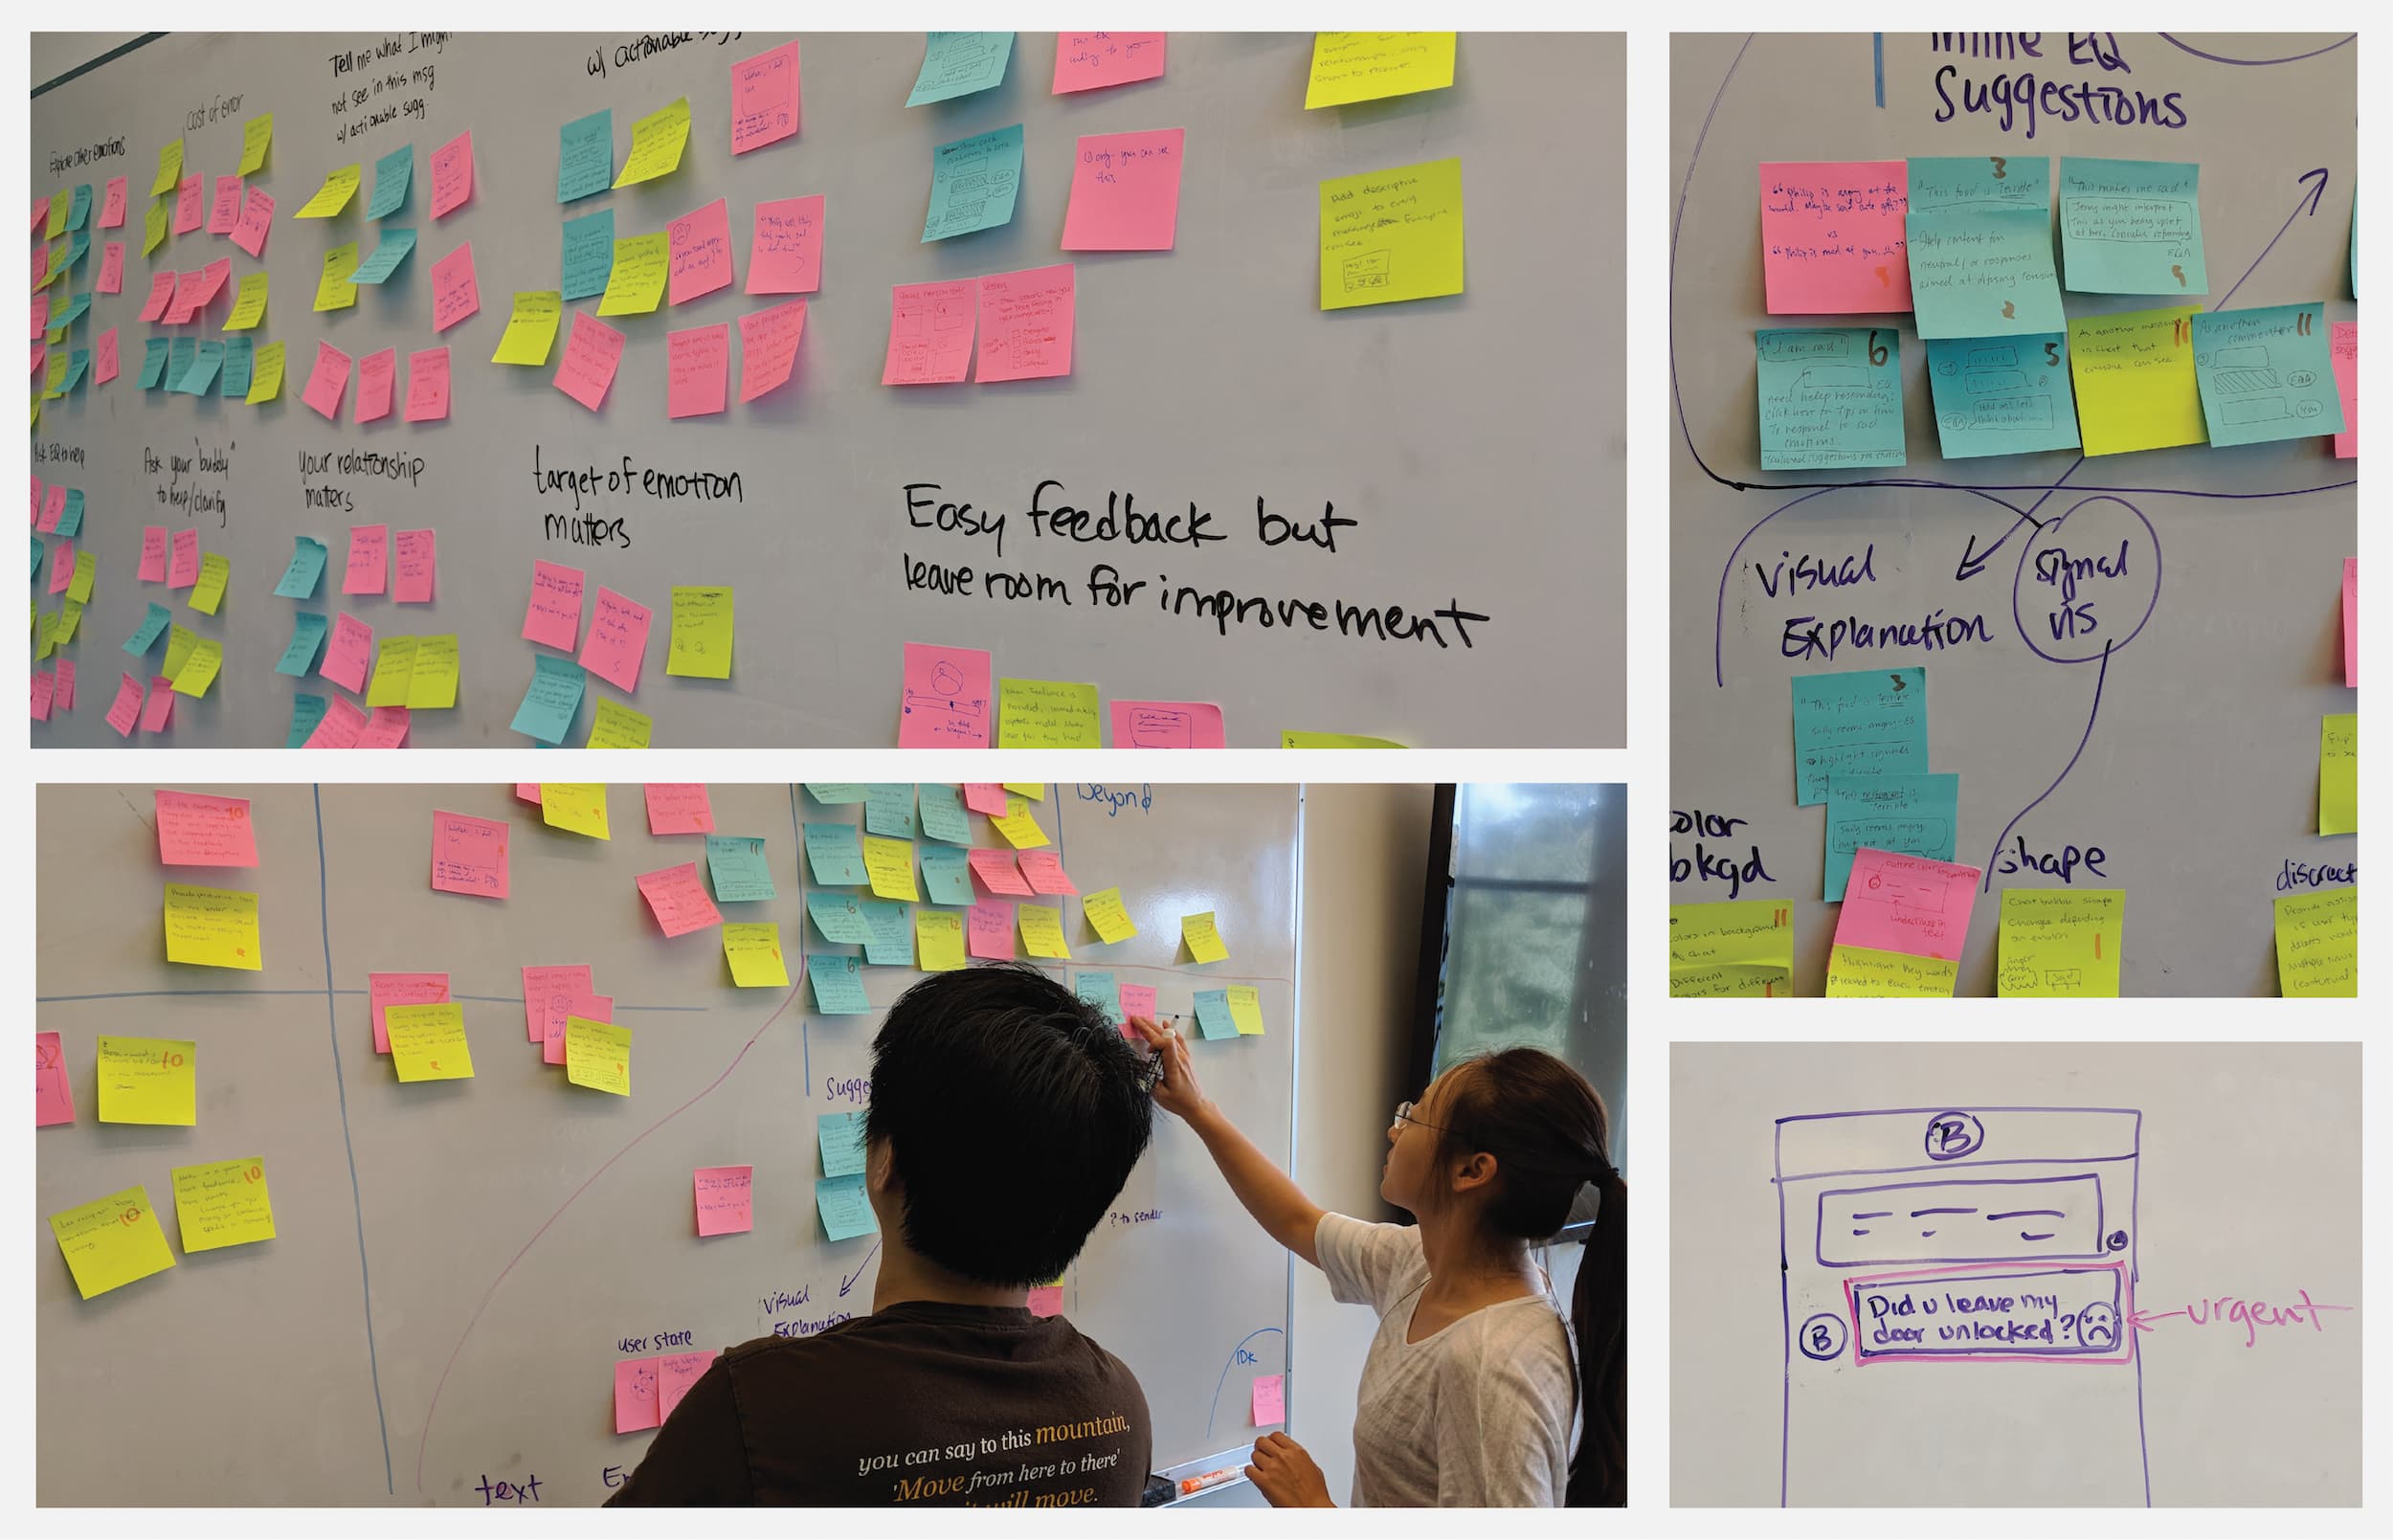 A grid of photographs showing a whiteboard filled with colored postit notes, sketches, and two people looking at the whiteboard.